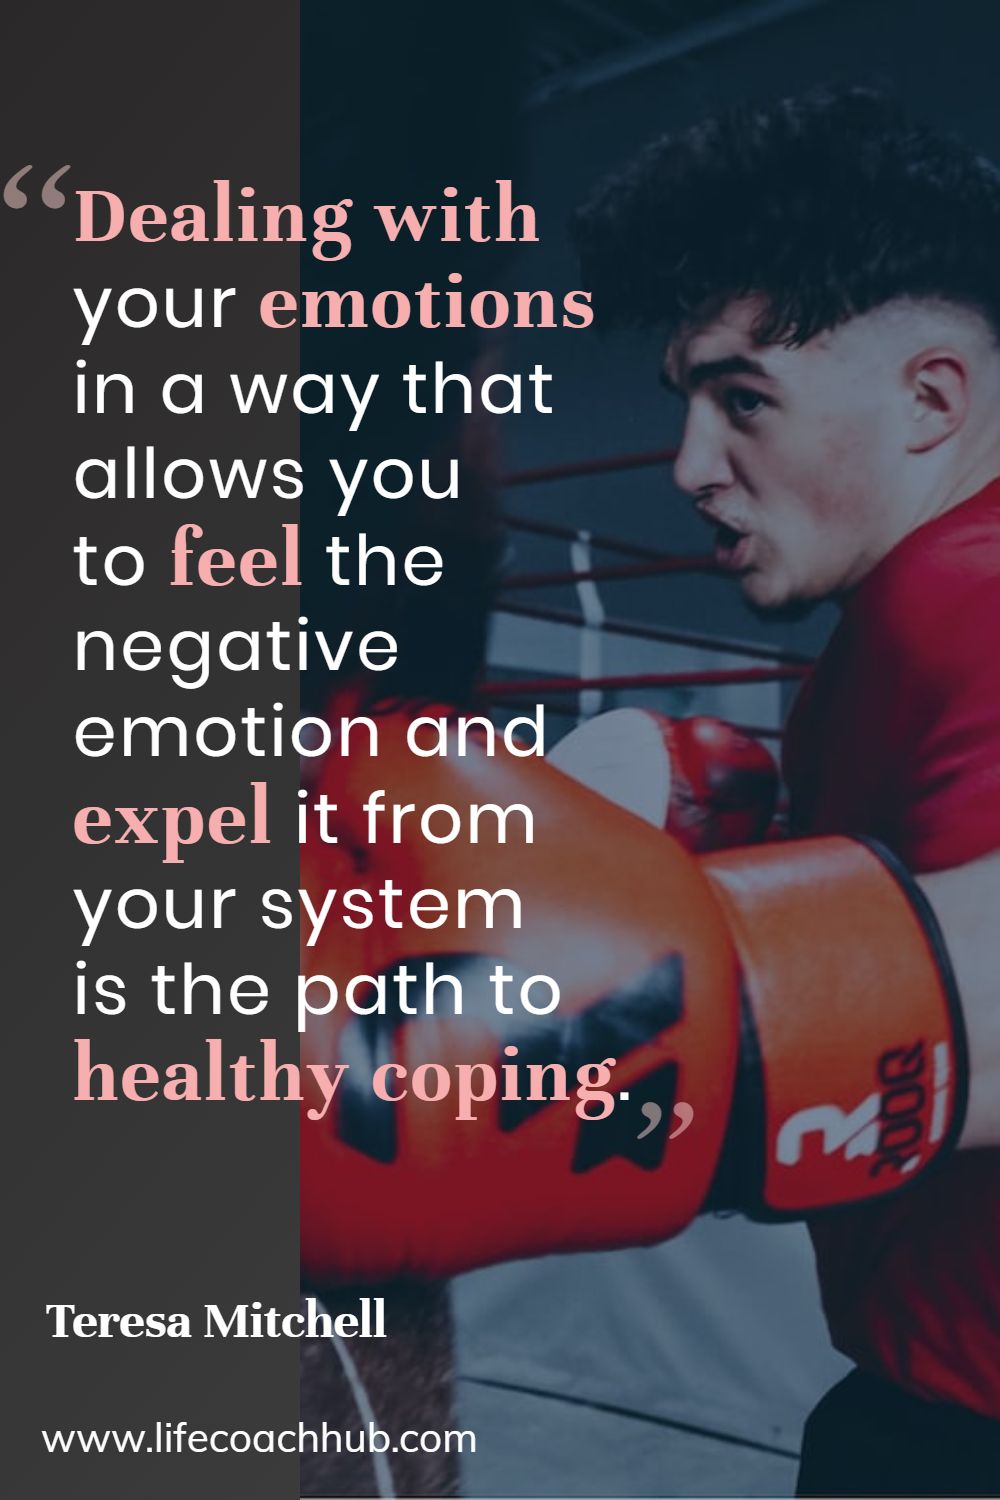 Dealing with your emotions in a way that allows you to feel the negative emotion and expel it from your system is the path to healthy coping. Teresa Mitchell Coaching Quote